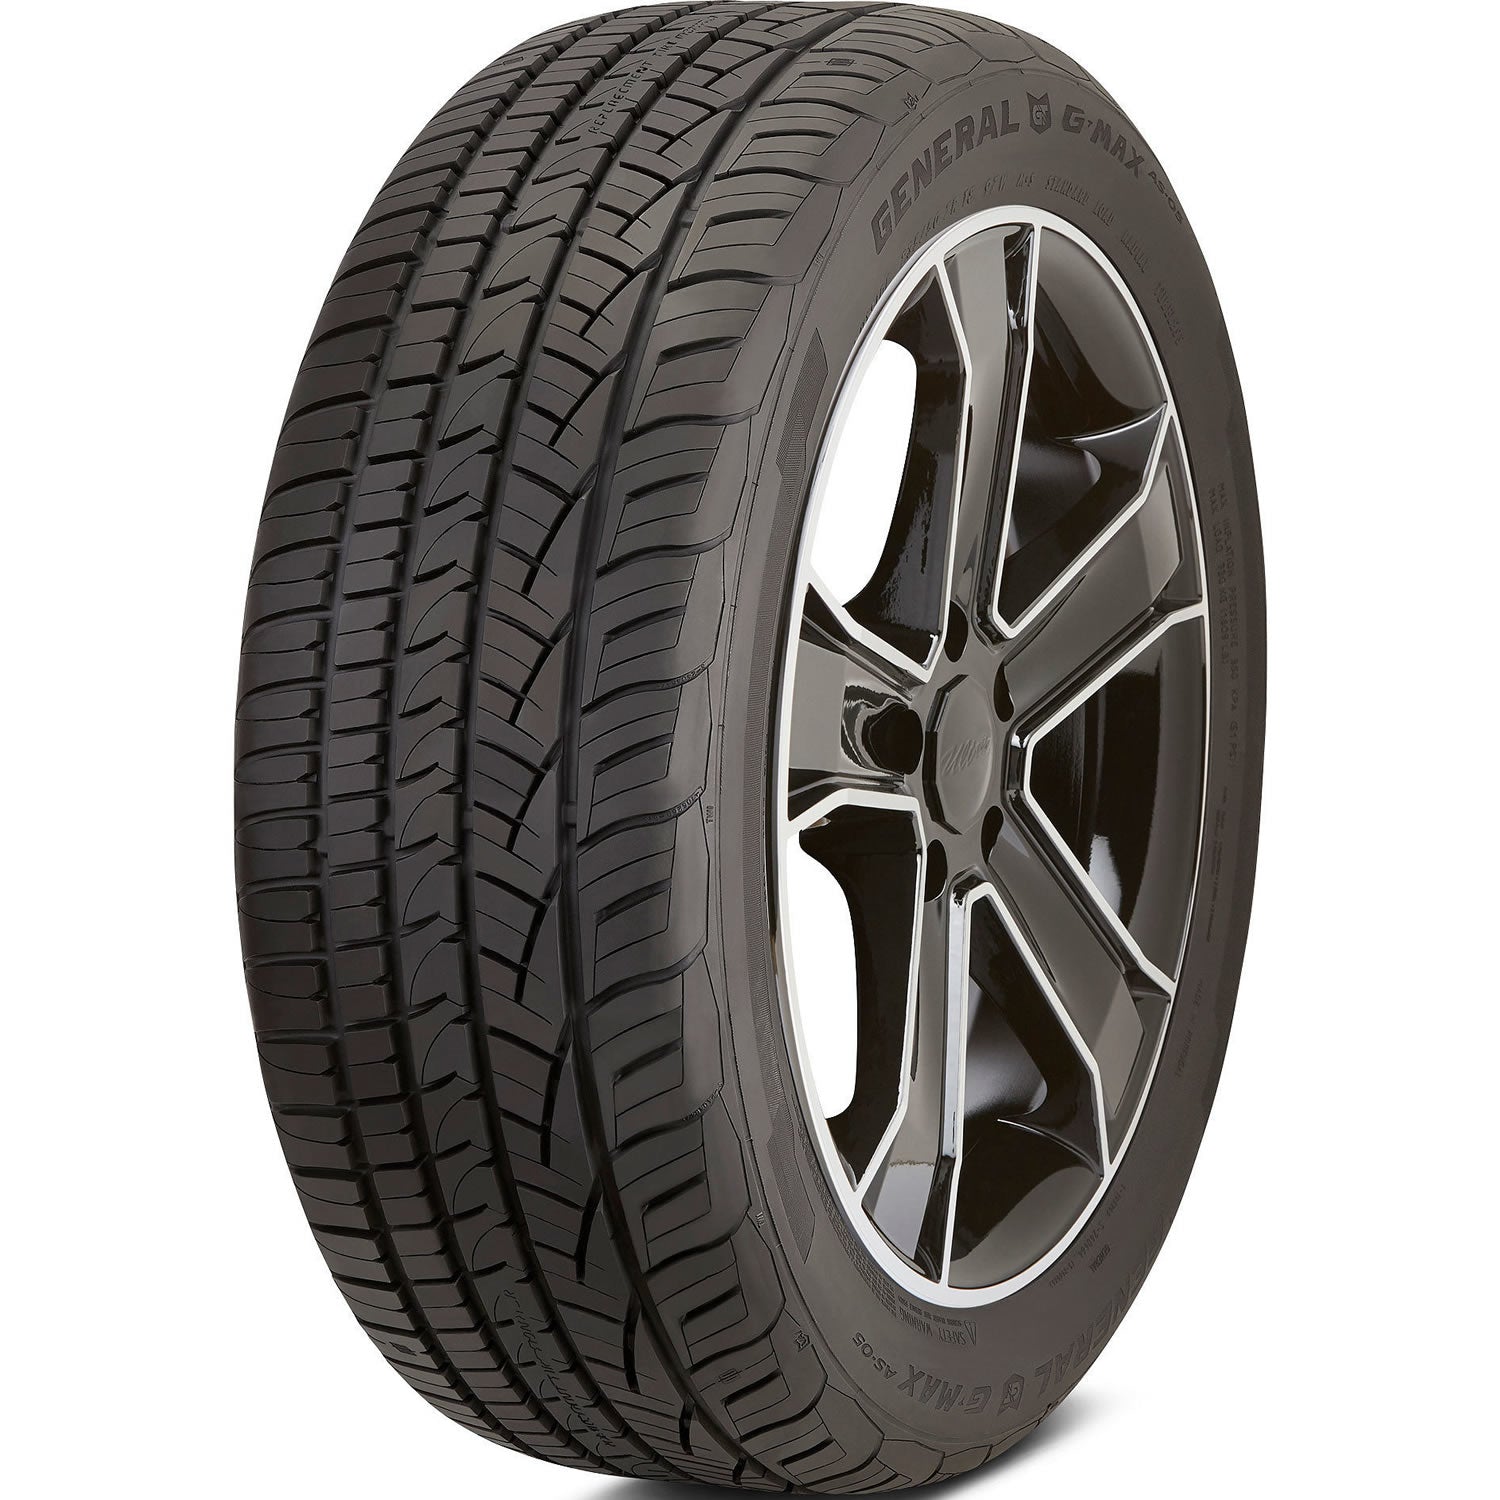 GENERAL G-MAX AS-05 245/50ZR17 (26.6X9.7R 17) Tires